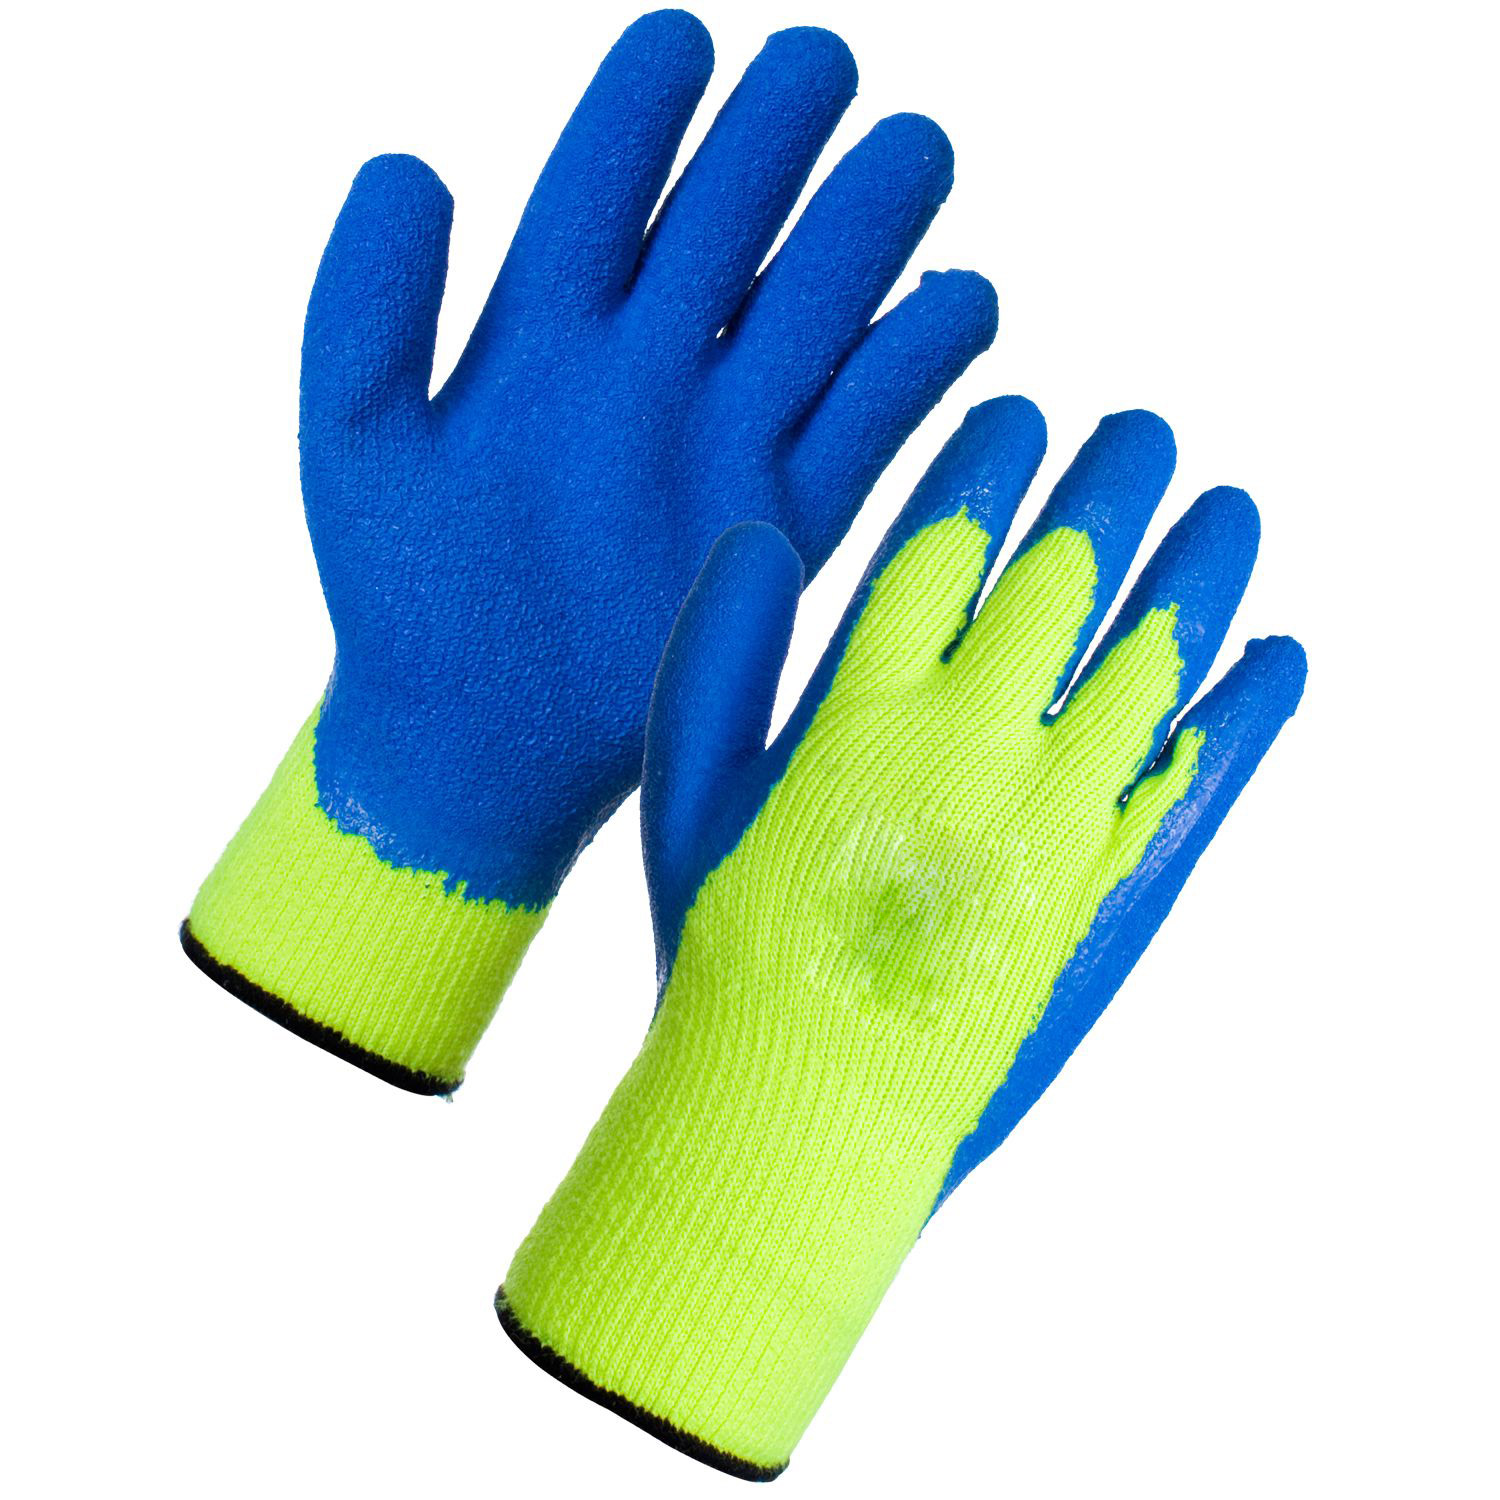  Plus Breathable Cool Ice Dipped Gloves with Latex Coated